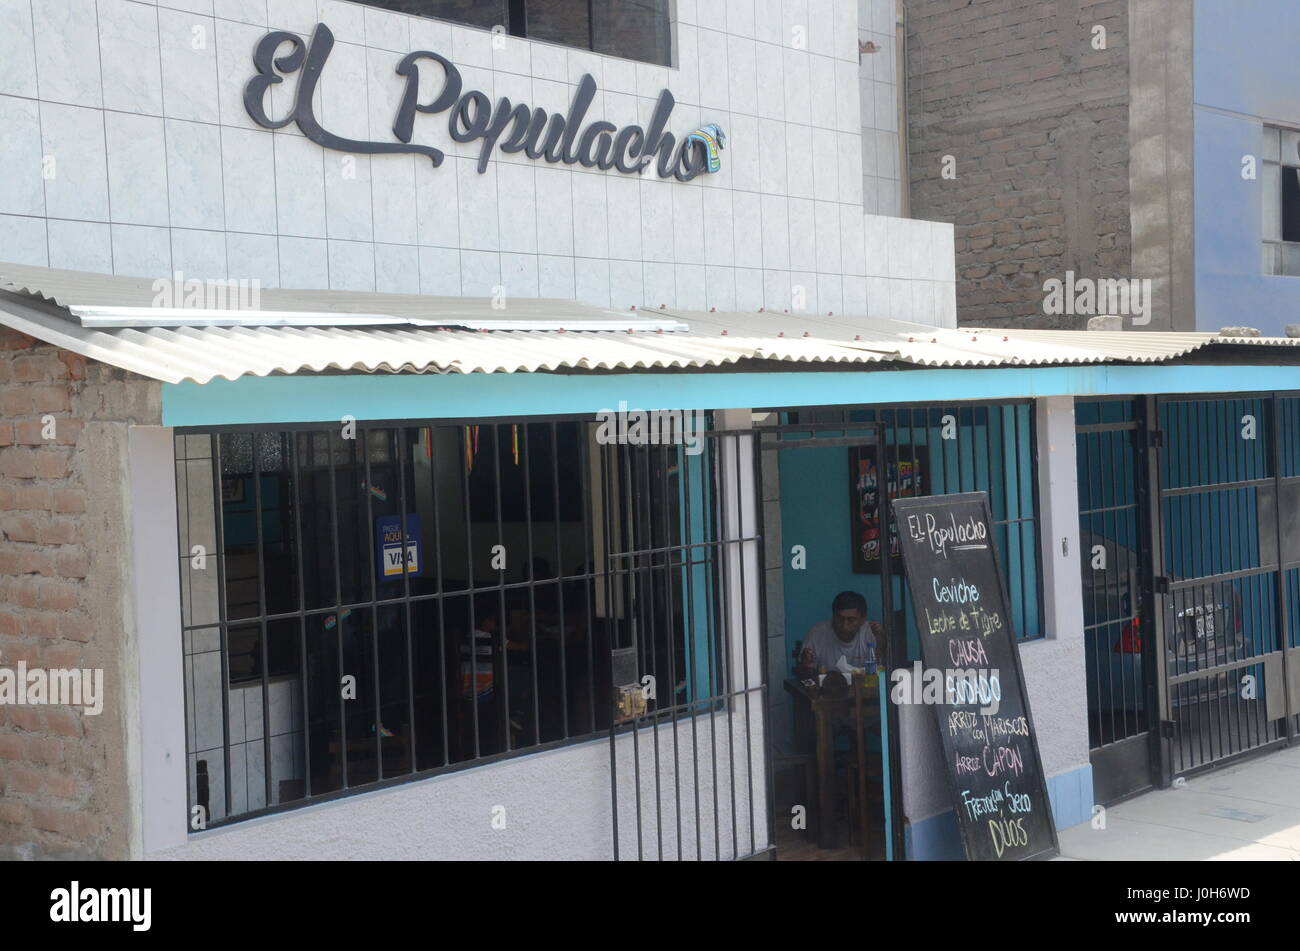 Lima, Peru. 5th Feb, 2017. The Populacho restaurant in Villa María del Triunfo, a poor neighbourhood in Lima, Peru, 5 February 2017. The restaurant offers haute cuisine fare at rates that are designed to be accessible to all. Photo: Georg Ismar/dpa/Alamy Live News Stock Photo